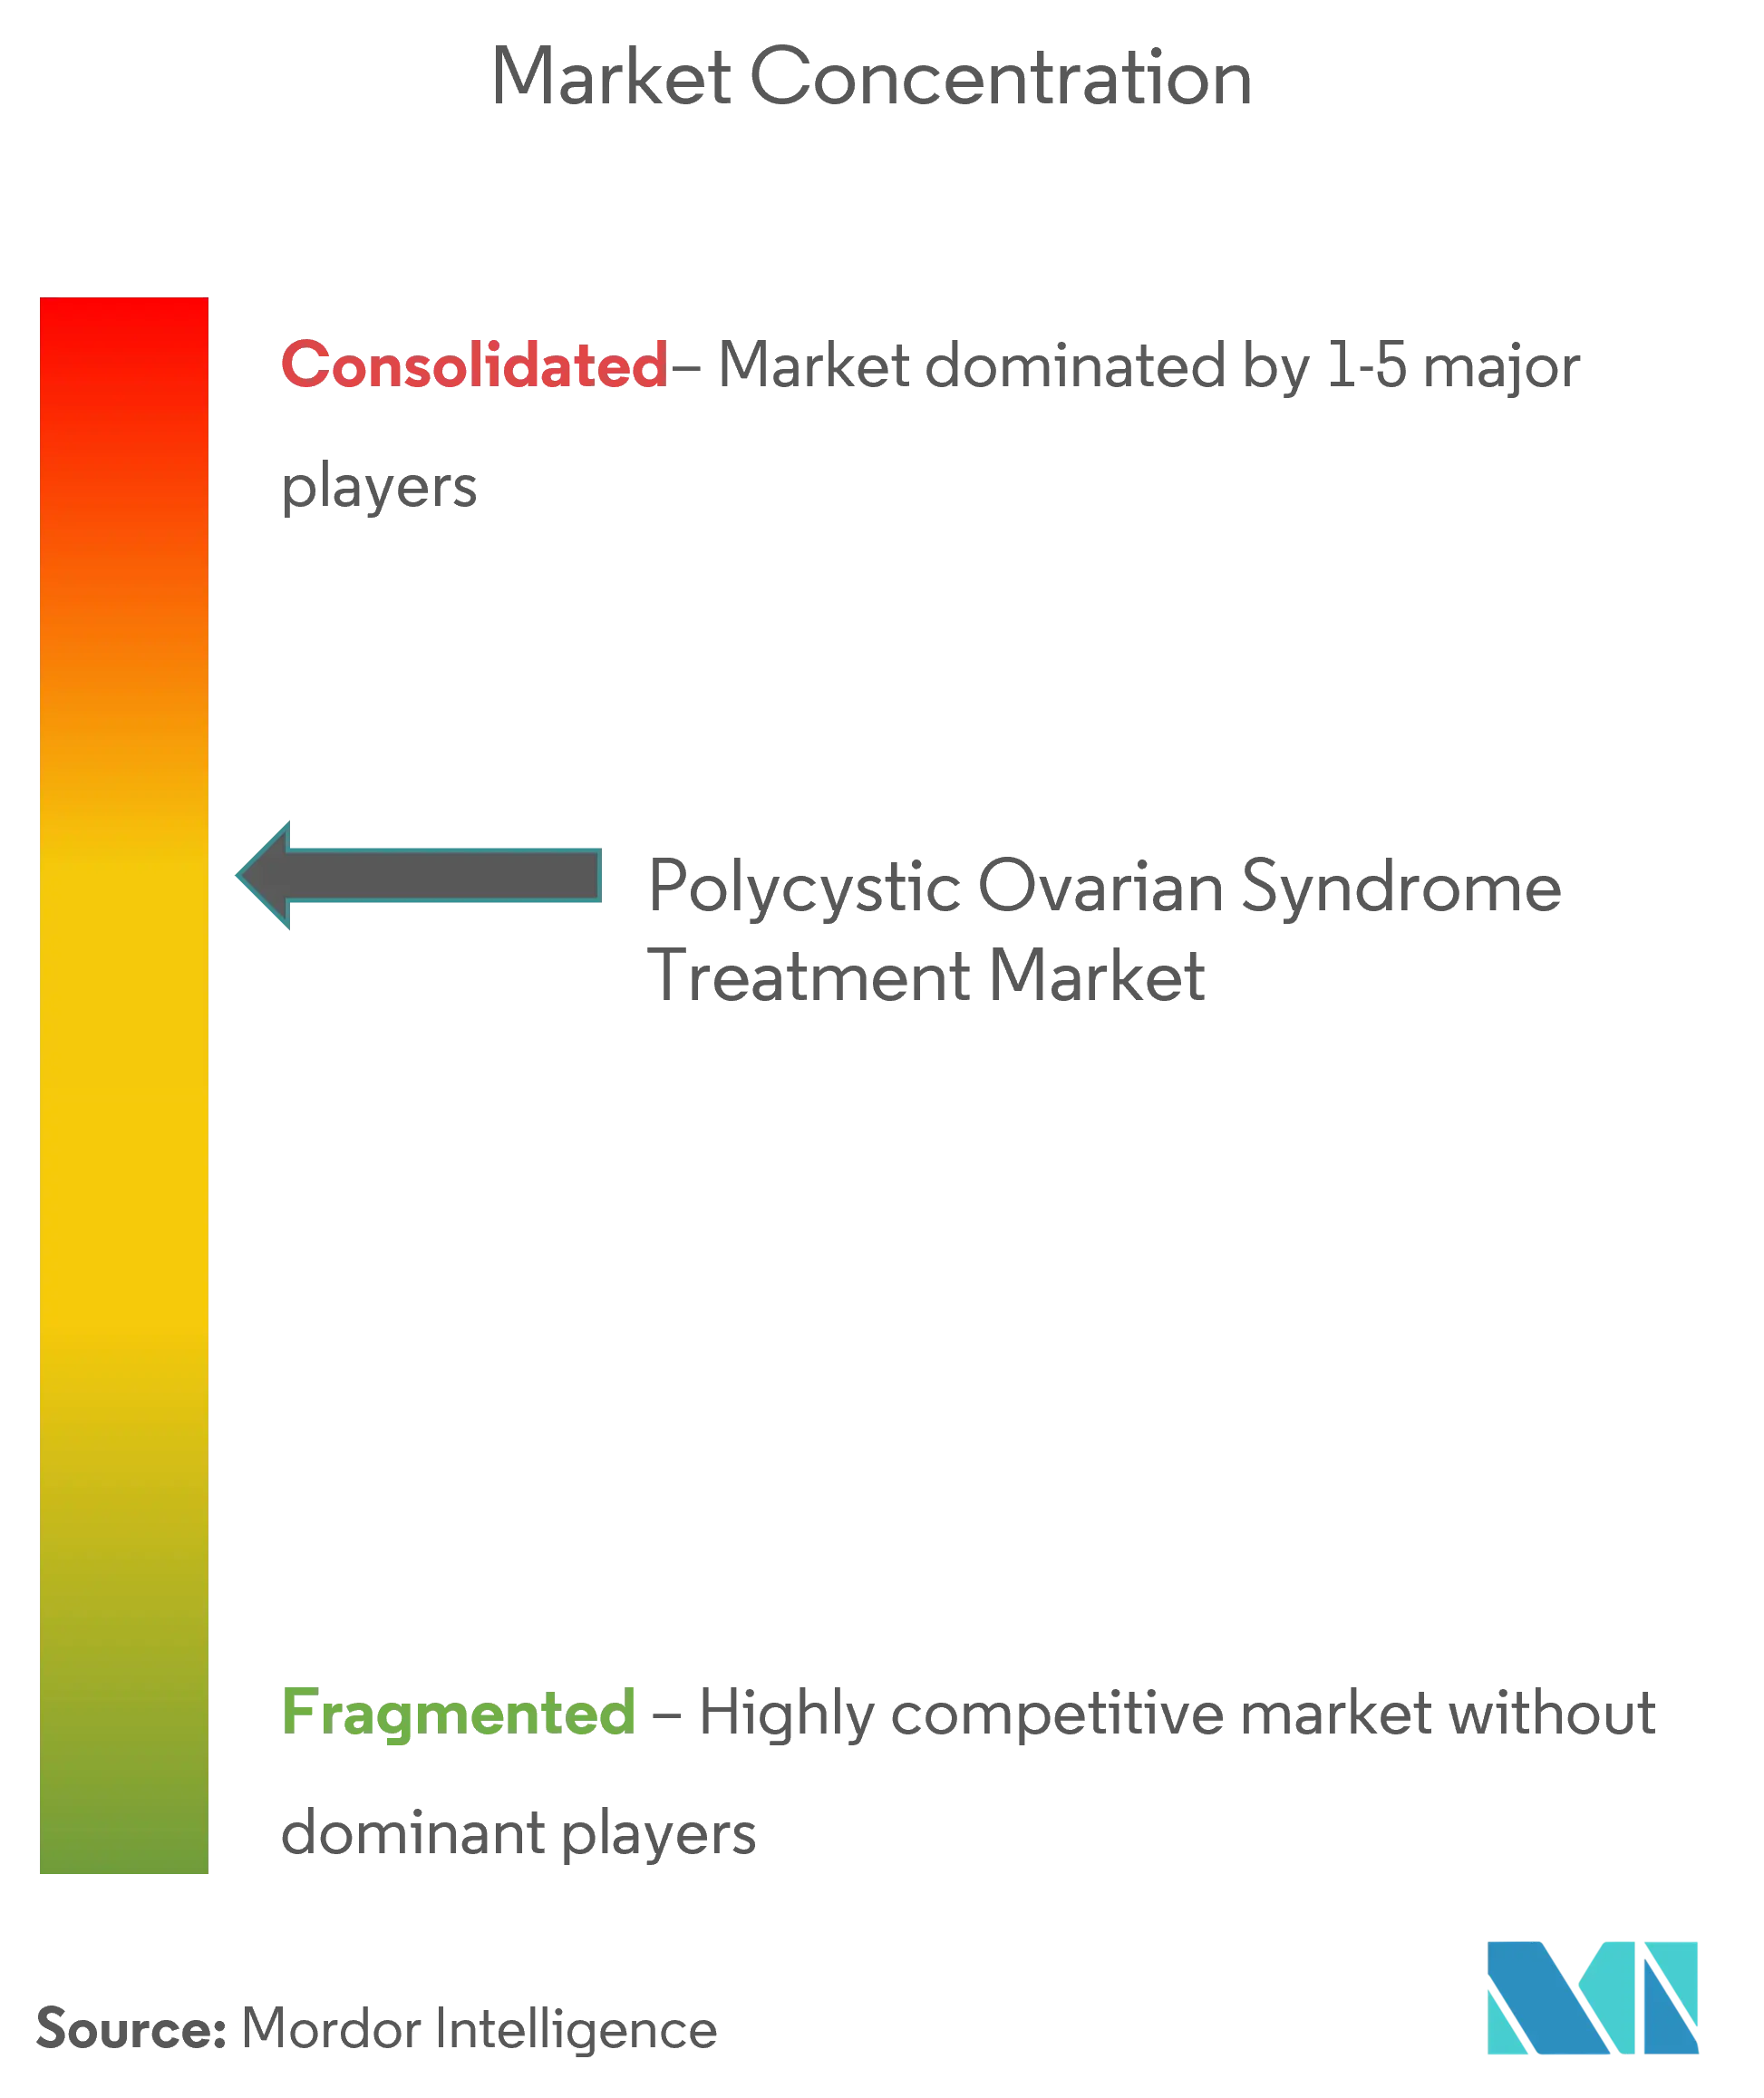 Polycystic Ovarian Syndrome Treatment Market Concentration